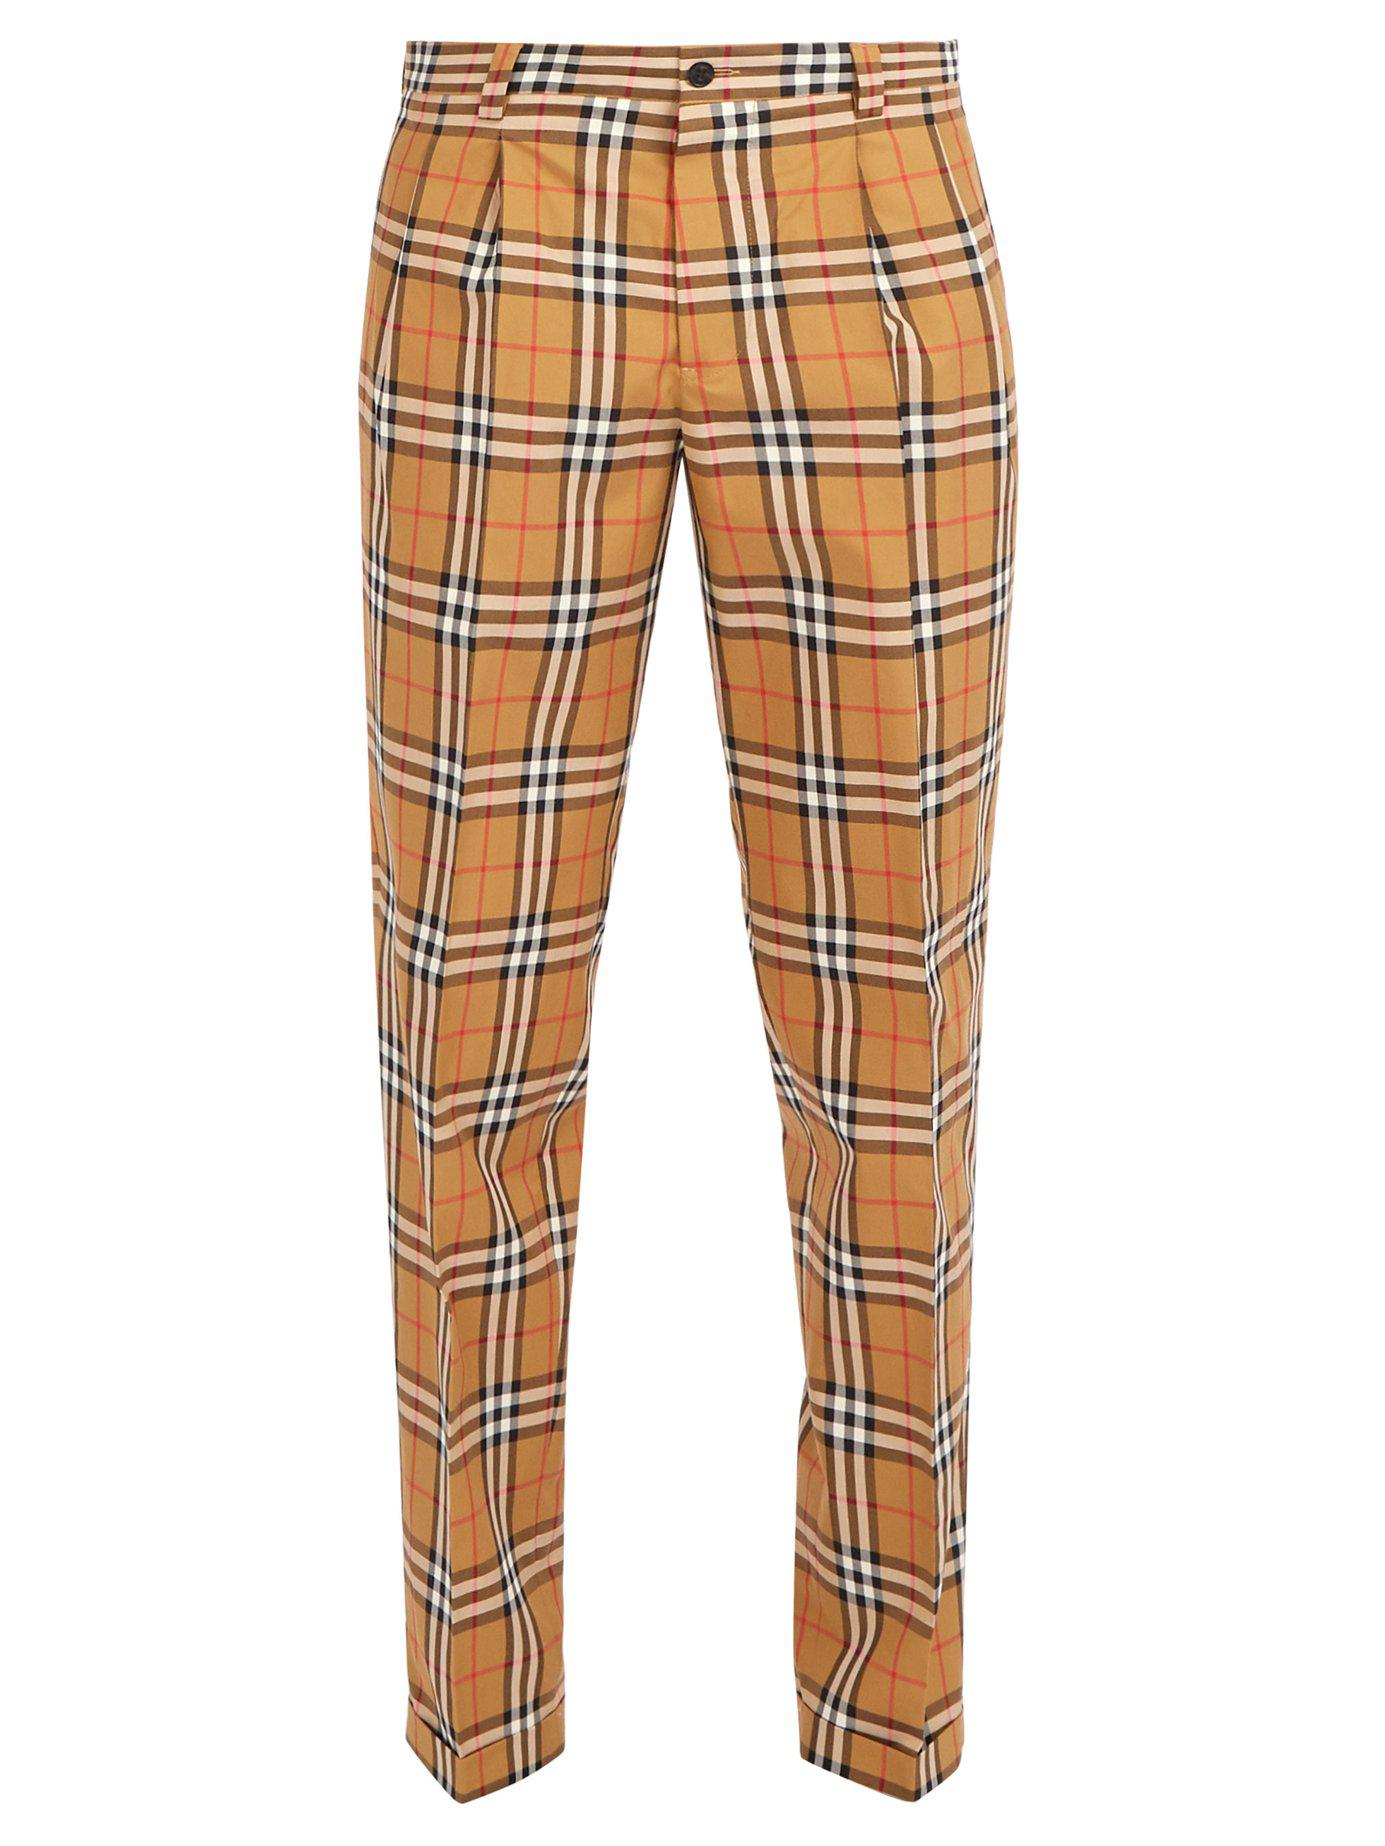 Burberry Classic Check Print Tailored Cotton Trousers in Beige (Natural)  for Men - Lyst